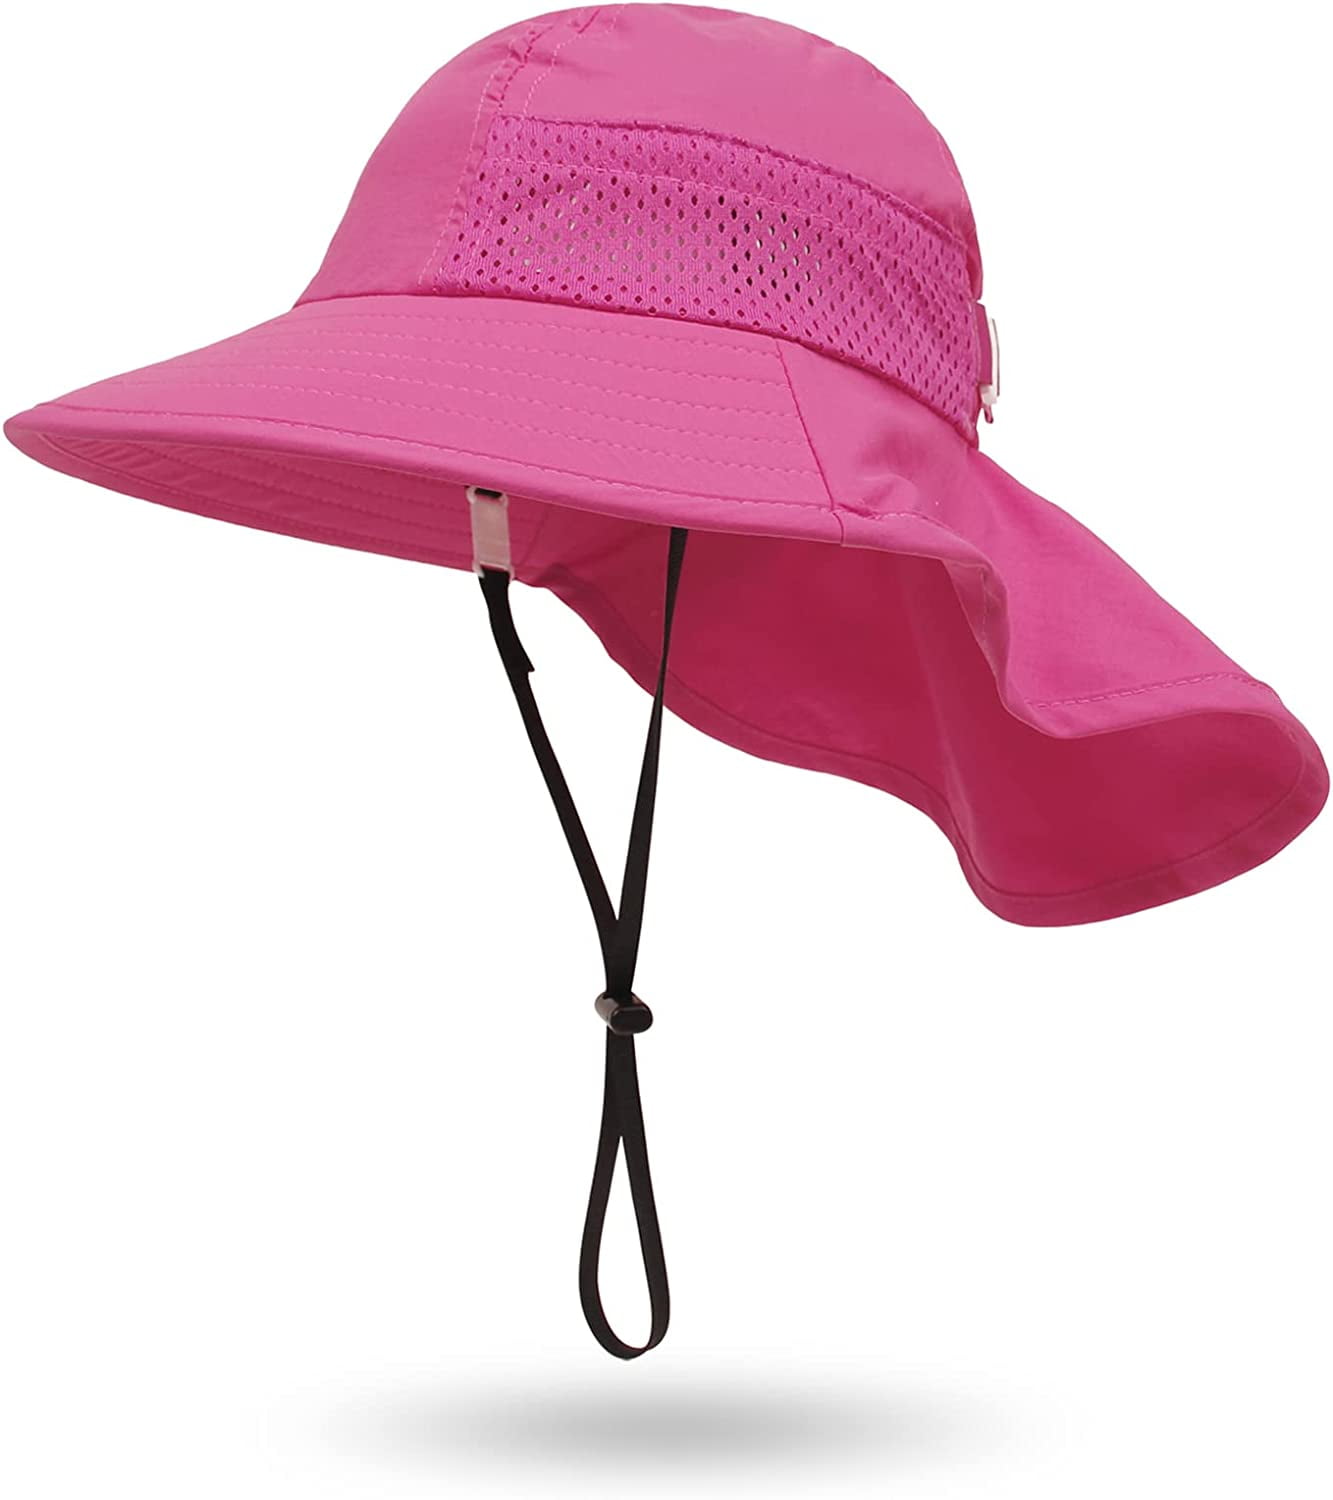 Toddler Sun Hat UPF 50 Sun Protection Fishing Hats for Boys  Girls,M(2-6y),Red